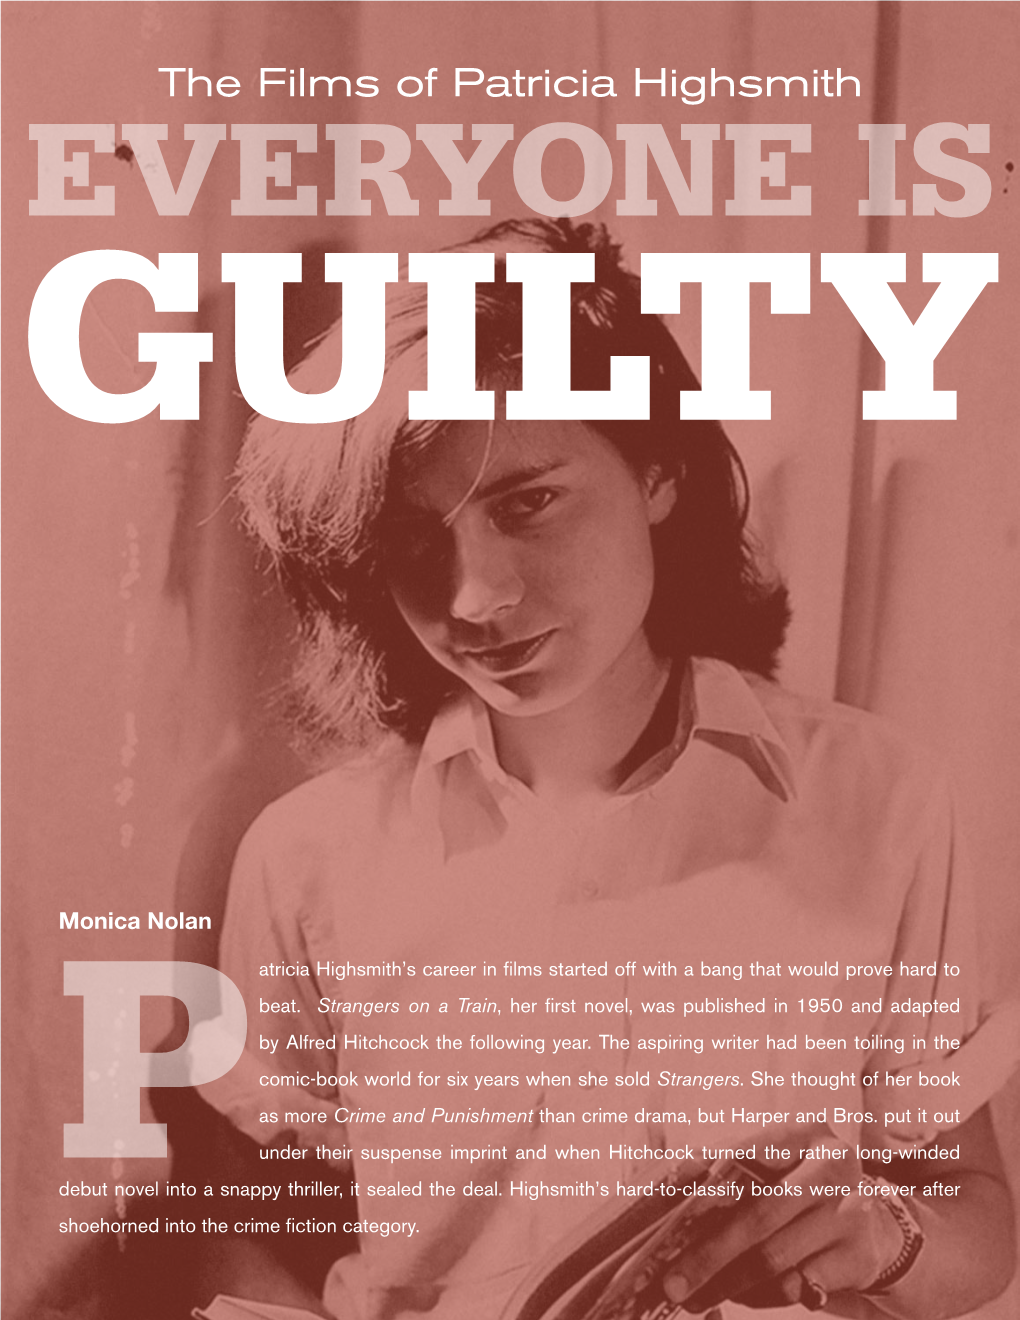 Everyone Is Guilty: the Films of Patricia Highsmith